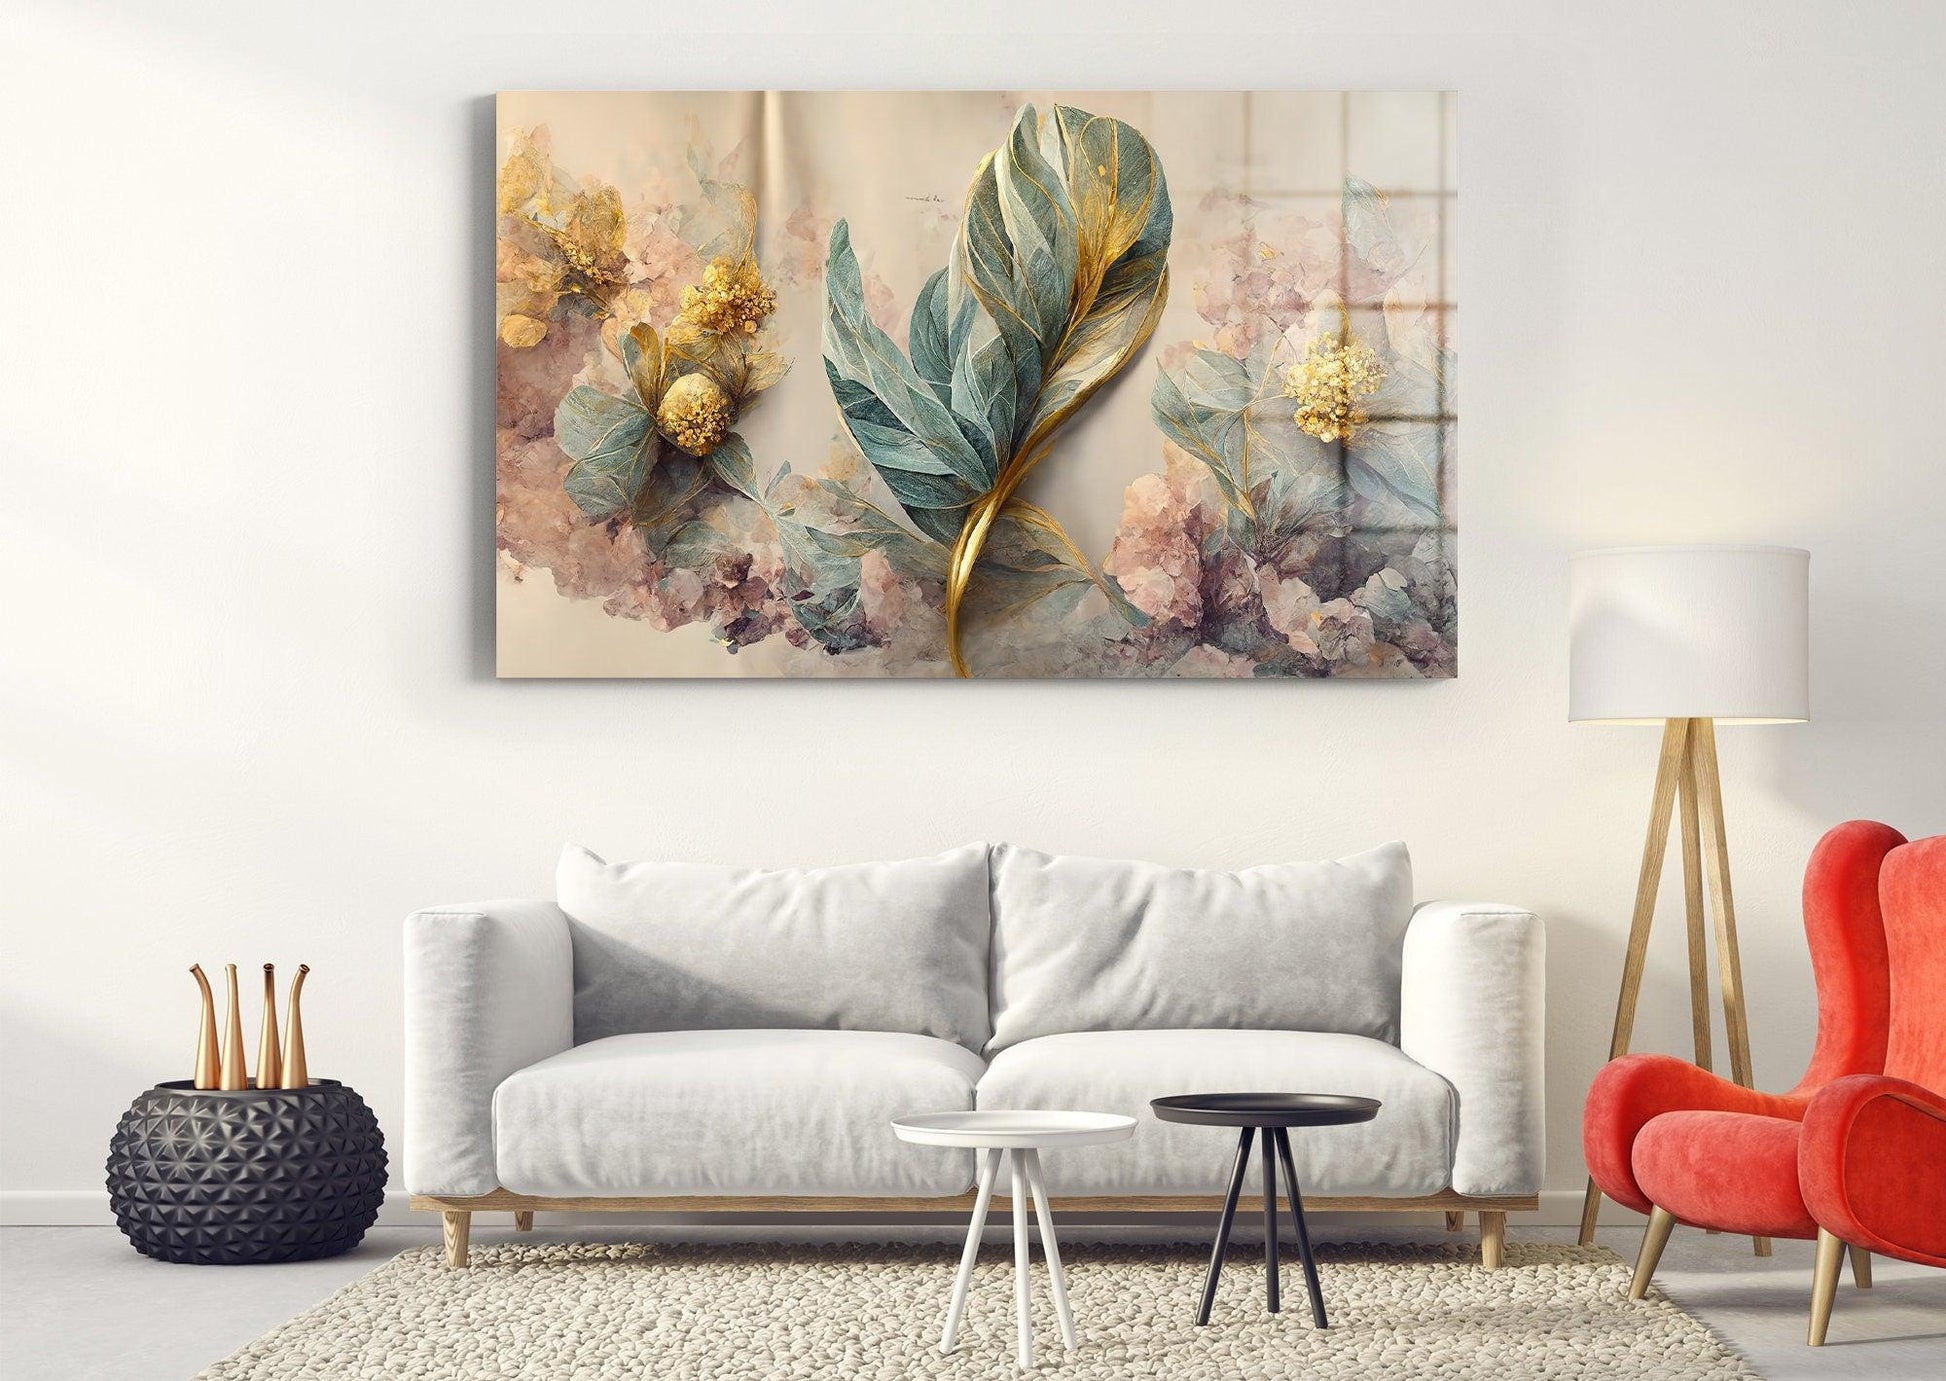 3D White flower Canvas Wall Art, Flowers Wall Hangings, White Canvas Wall Print, pink Room Decor, Ready to Hang - TrendiArt